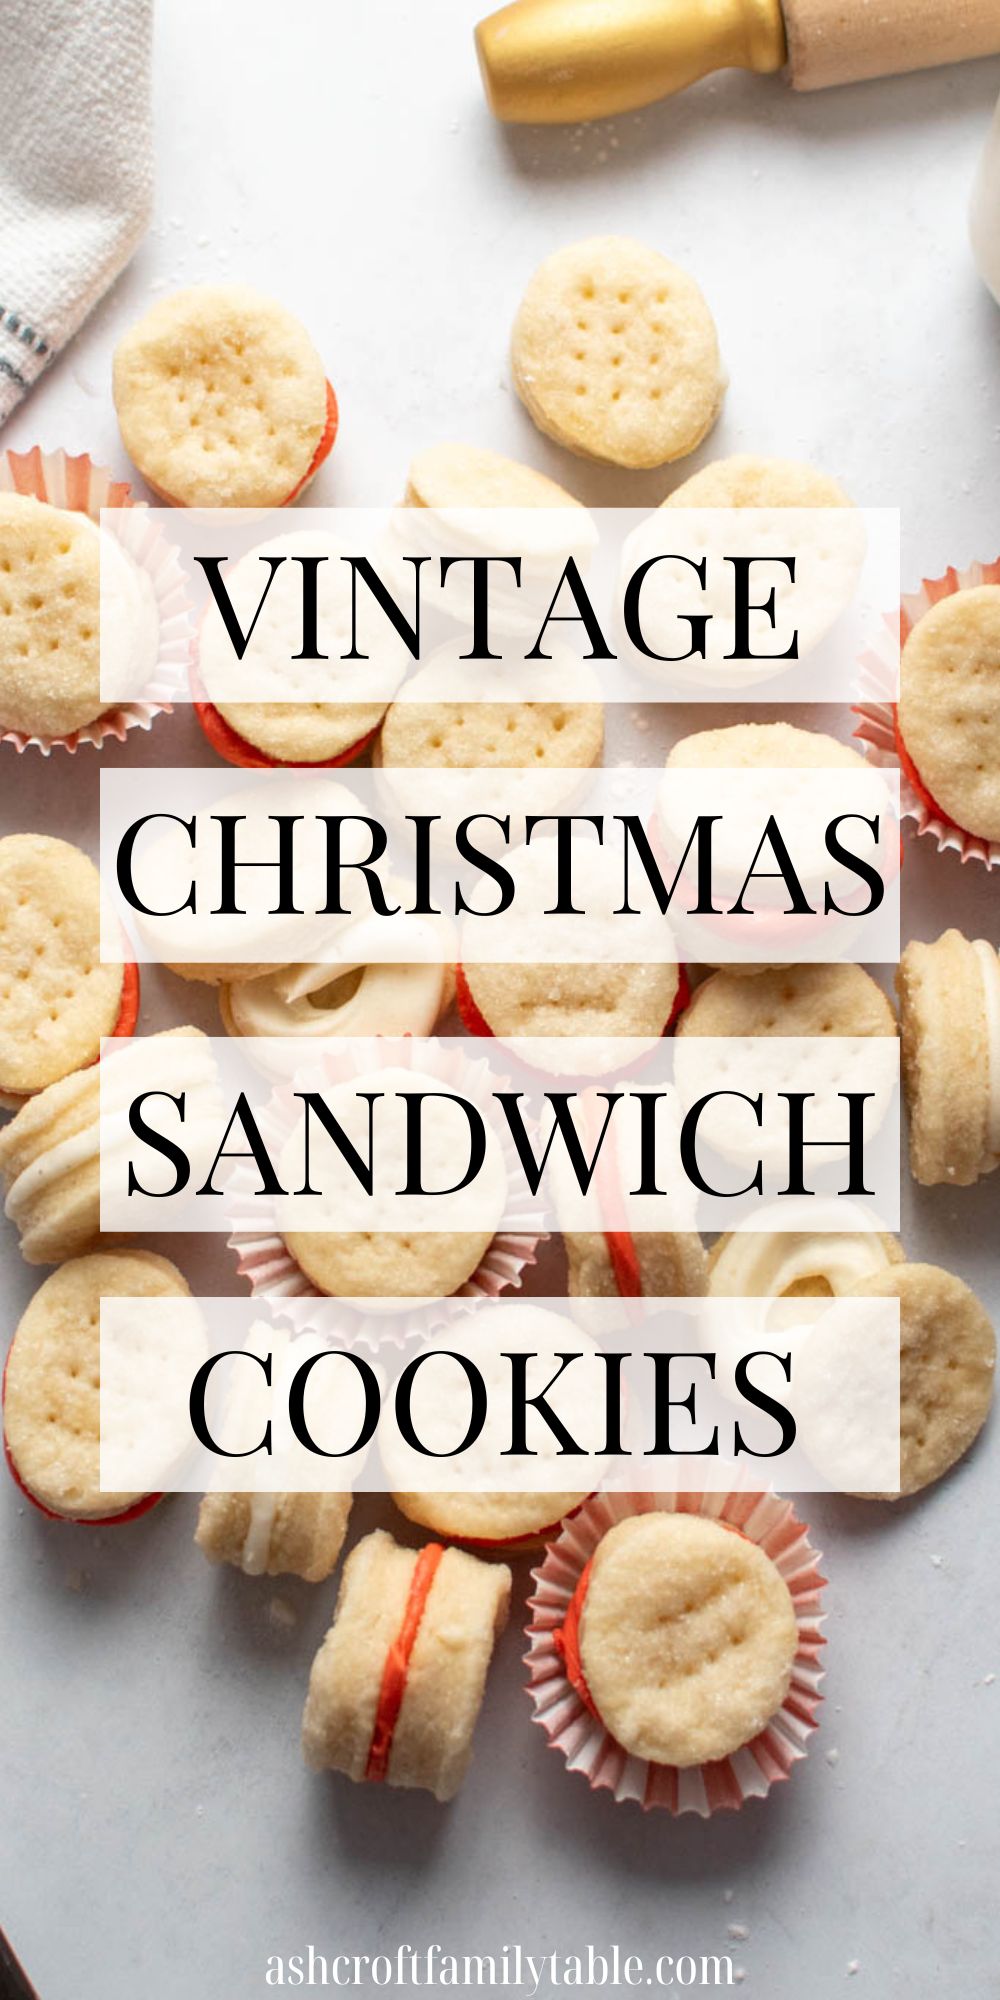 Pinterest graphic with text and photo of Christmas sandwich cookies with red and white frosting.